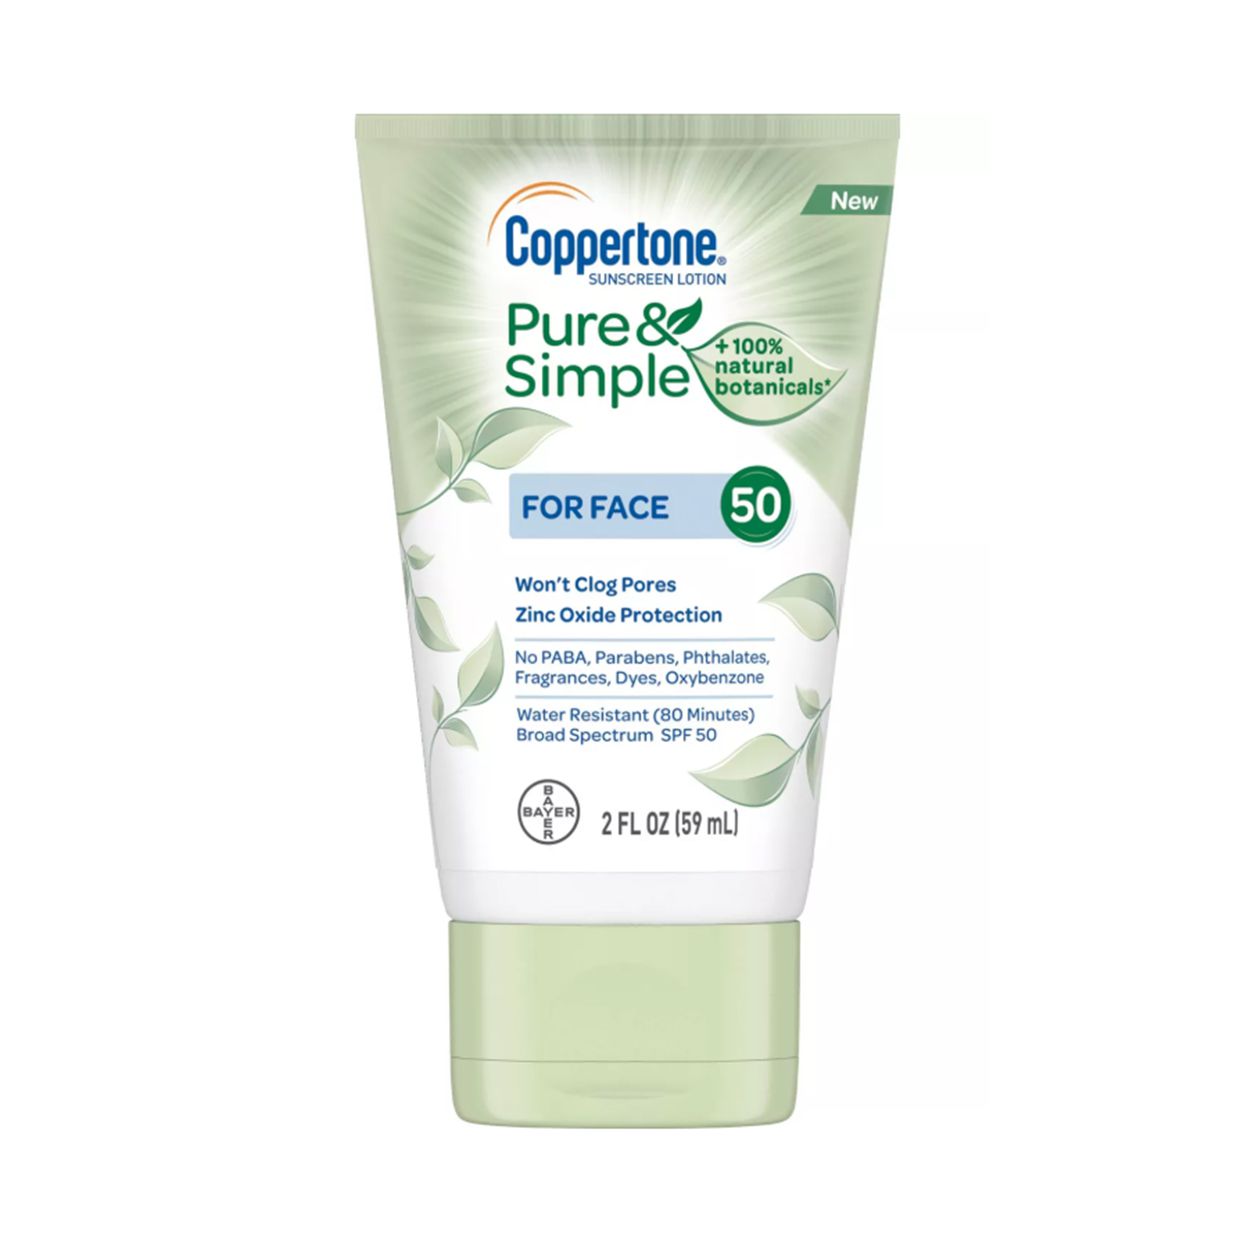 Coppertone Pure and Simple Botanicals Faces Sunscreen Lotion SPF 50